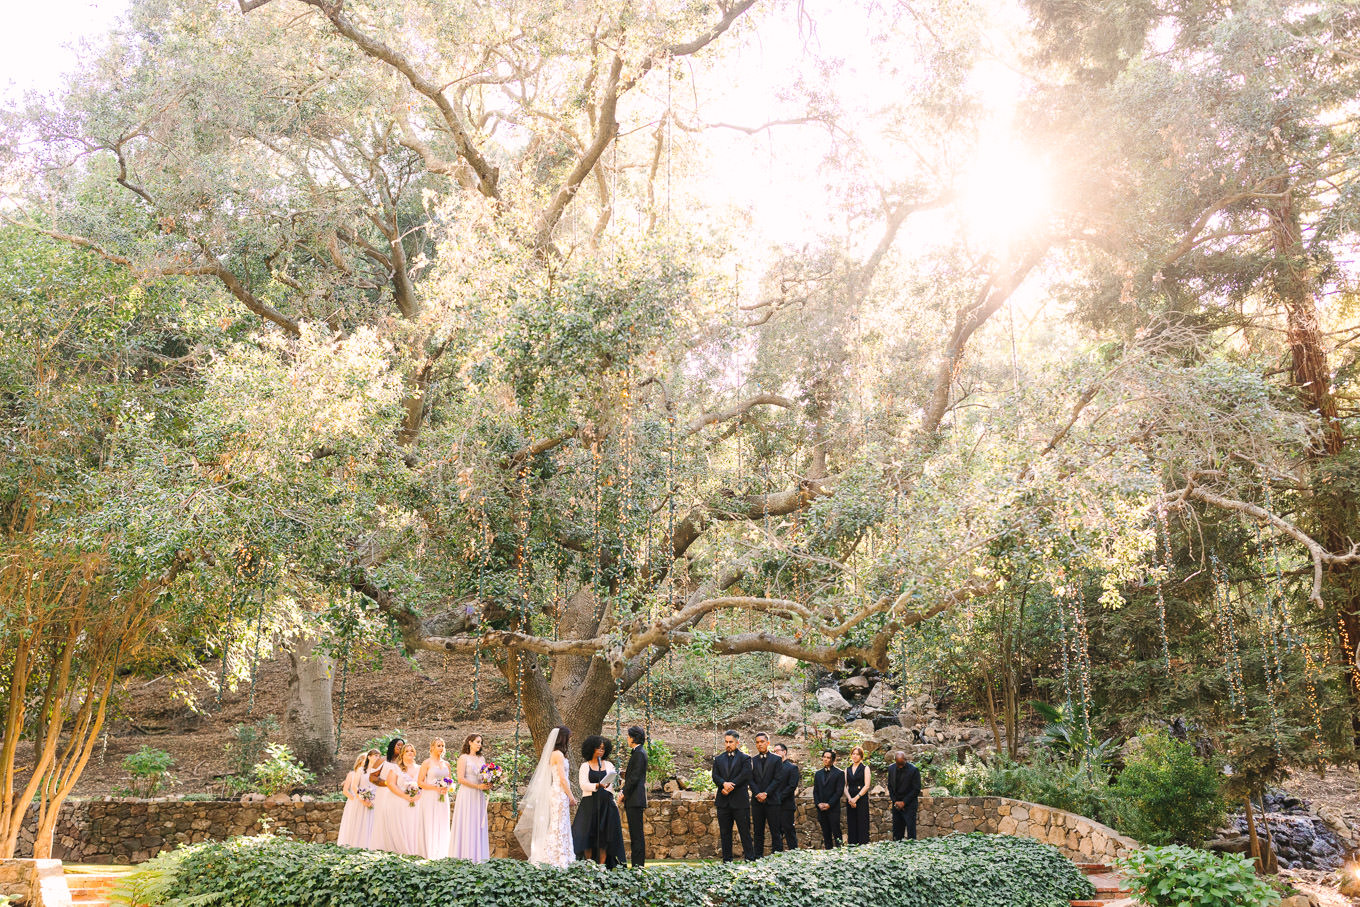 Calamigos Ranch Malibu wedding | Wedding and elopement photography roundup | Los Angeles and Palm Springs photographer | #losangeleswedding #palmspringswedding #elopementphotographer Source: Mary Costa Photography | Los Angeles